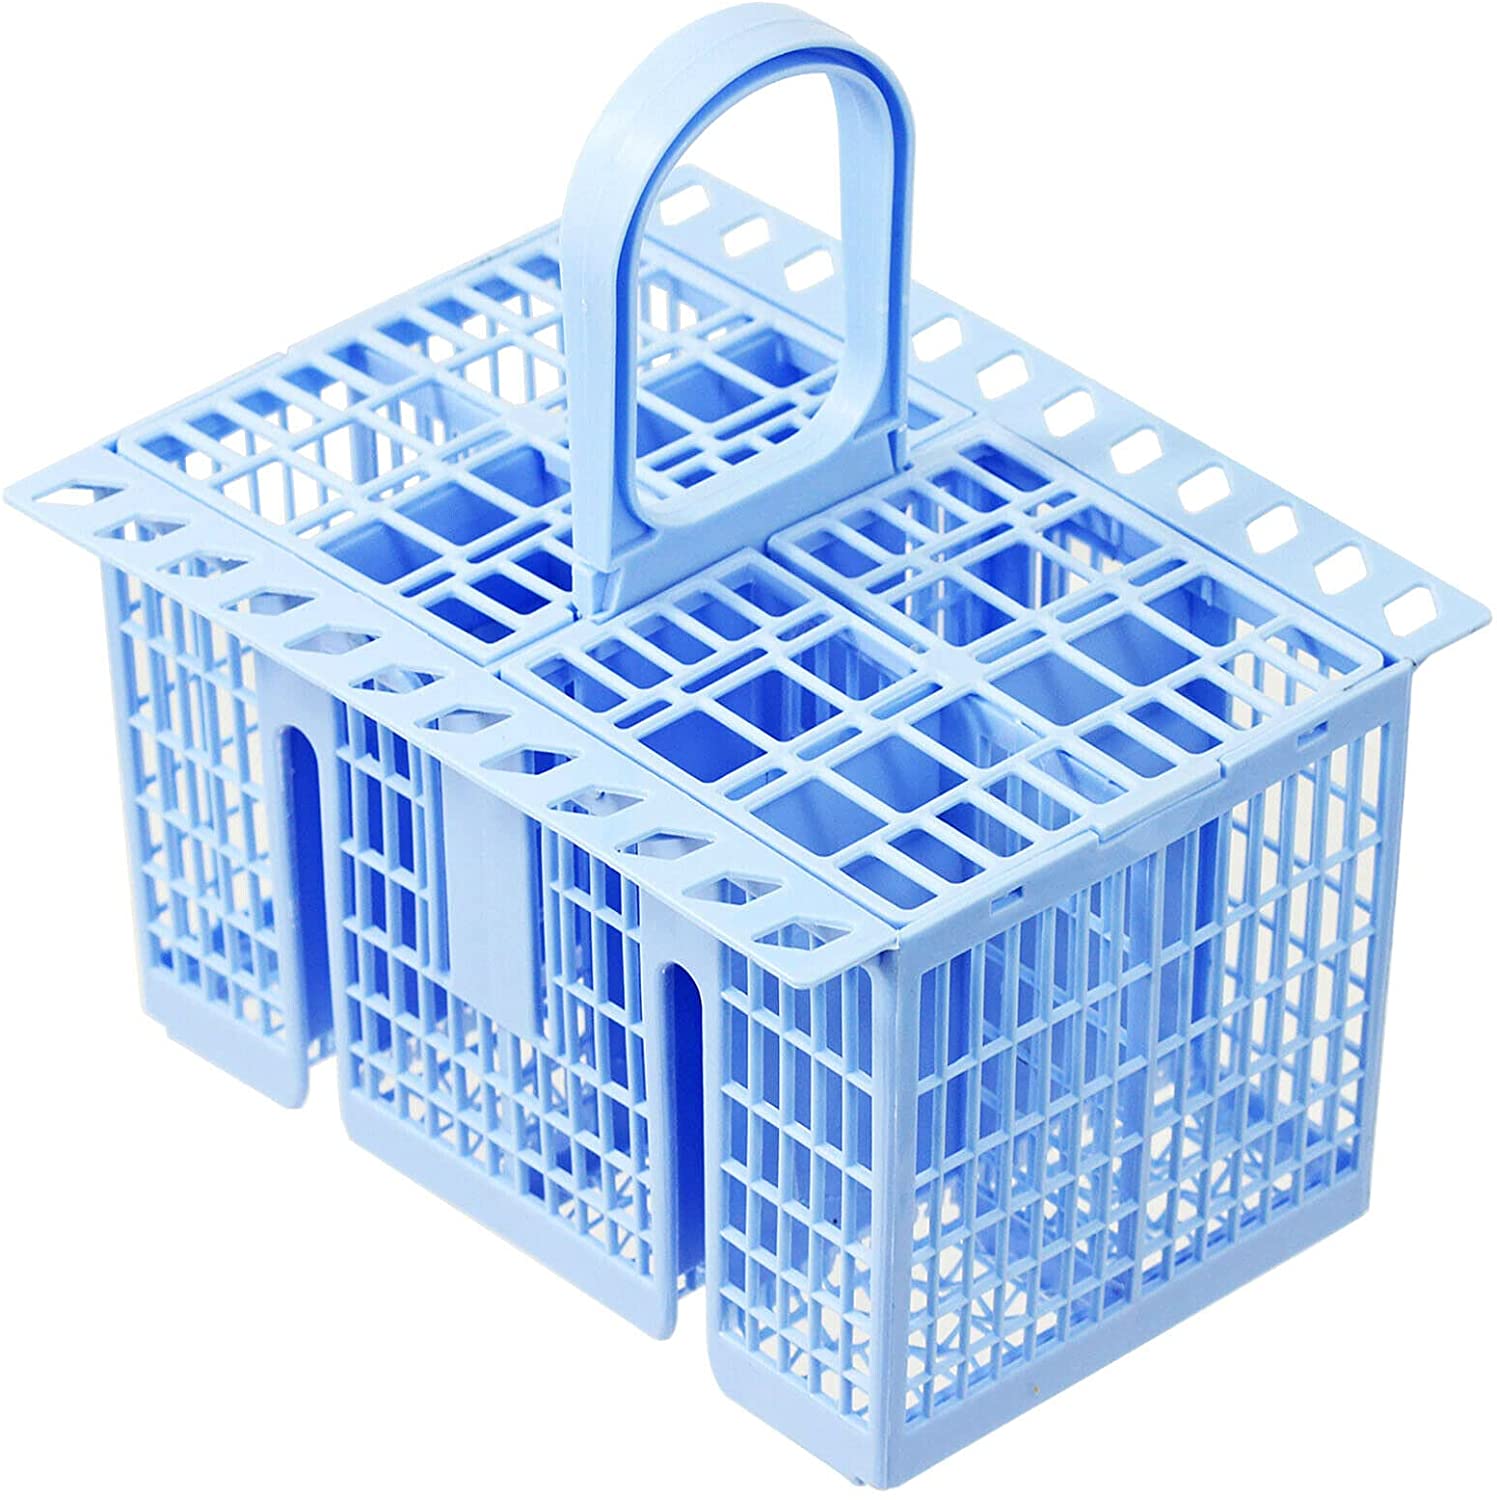 SPARES2GO Cutlery Basket compatible with Beko Dishwasher (Blue, 220 x 208 x 160mm)